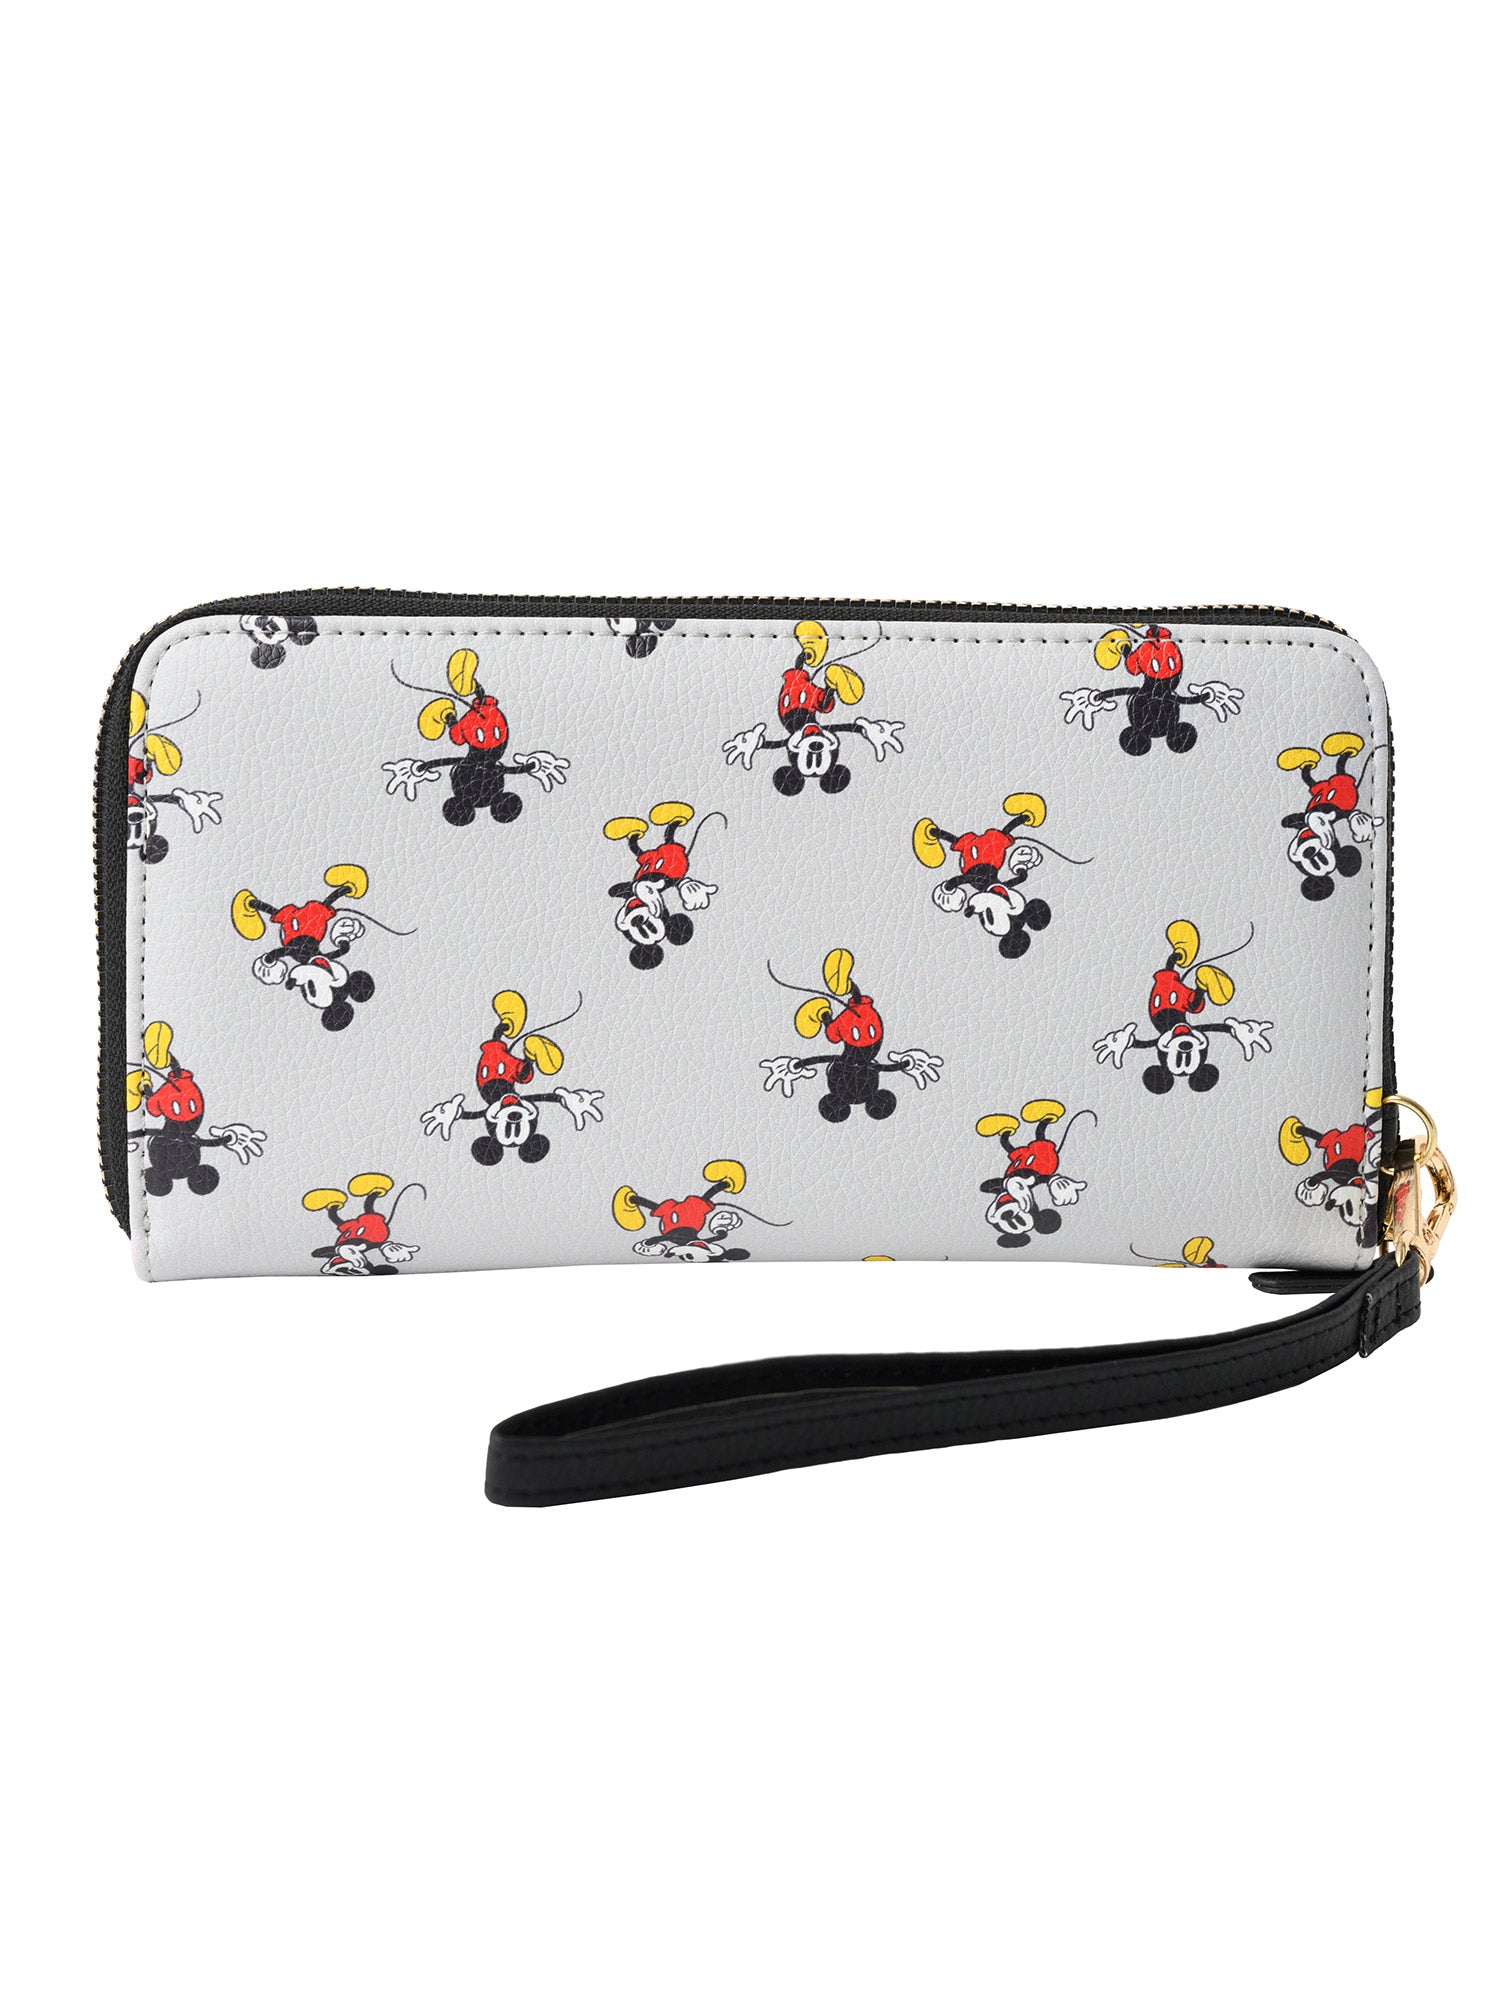 Disney Women's Mickey Mouse Wallet Zip Around Wristlet All-Over Character Print